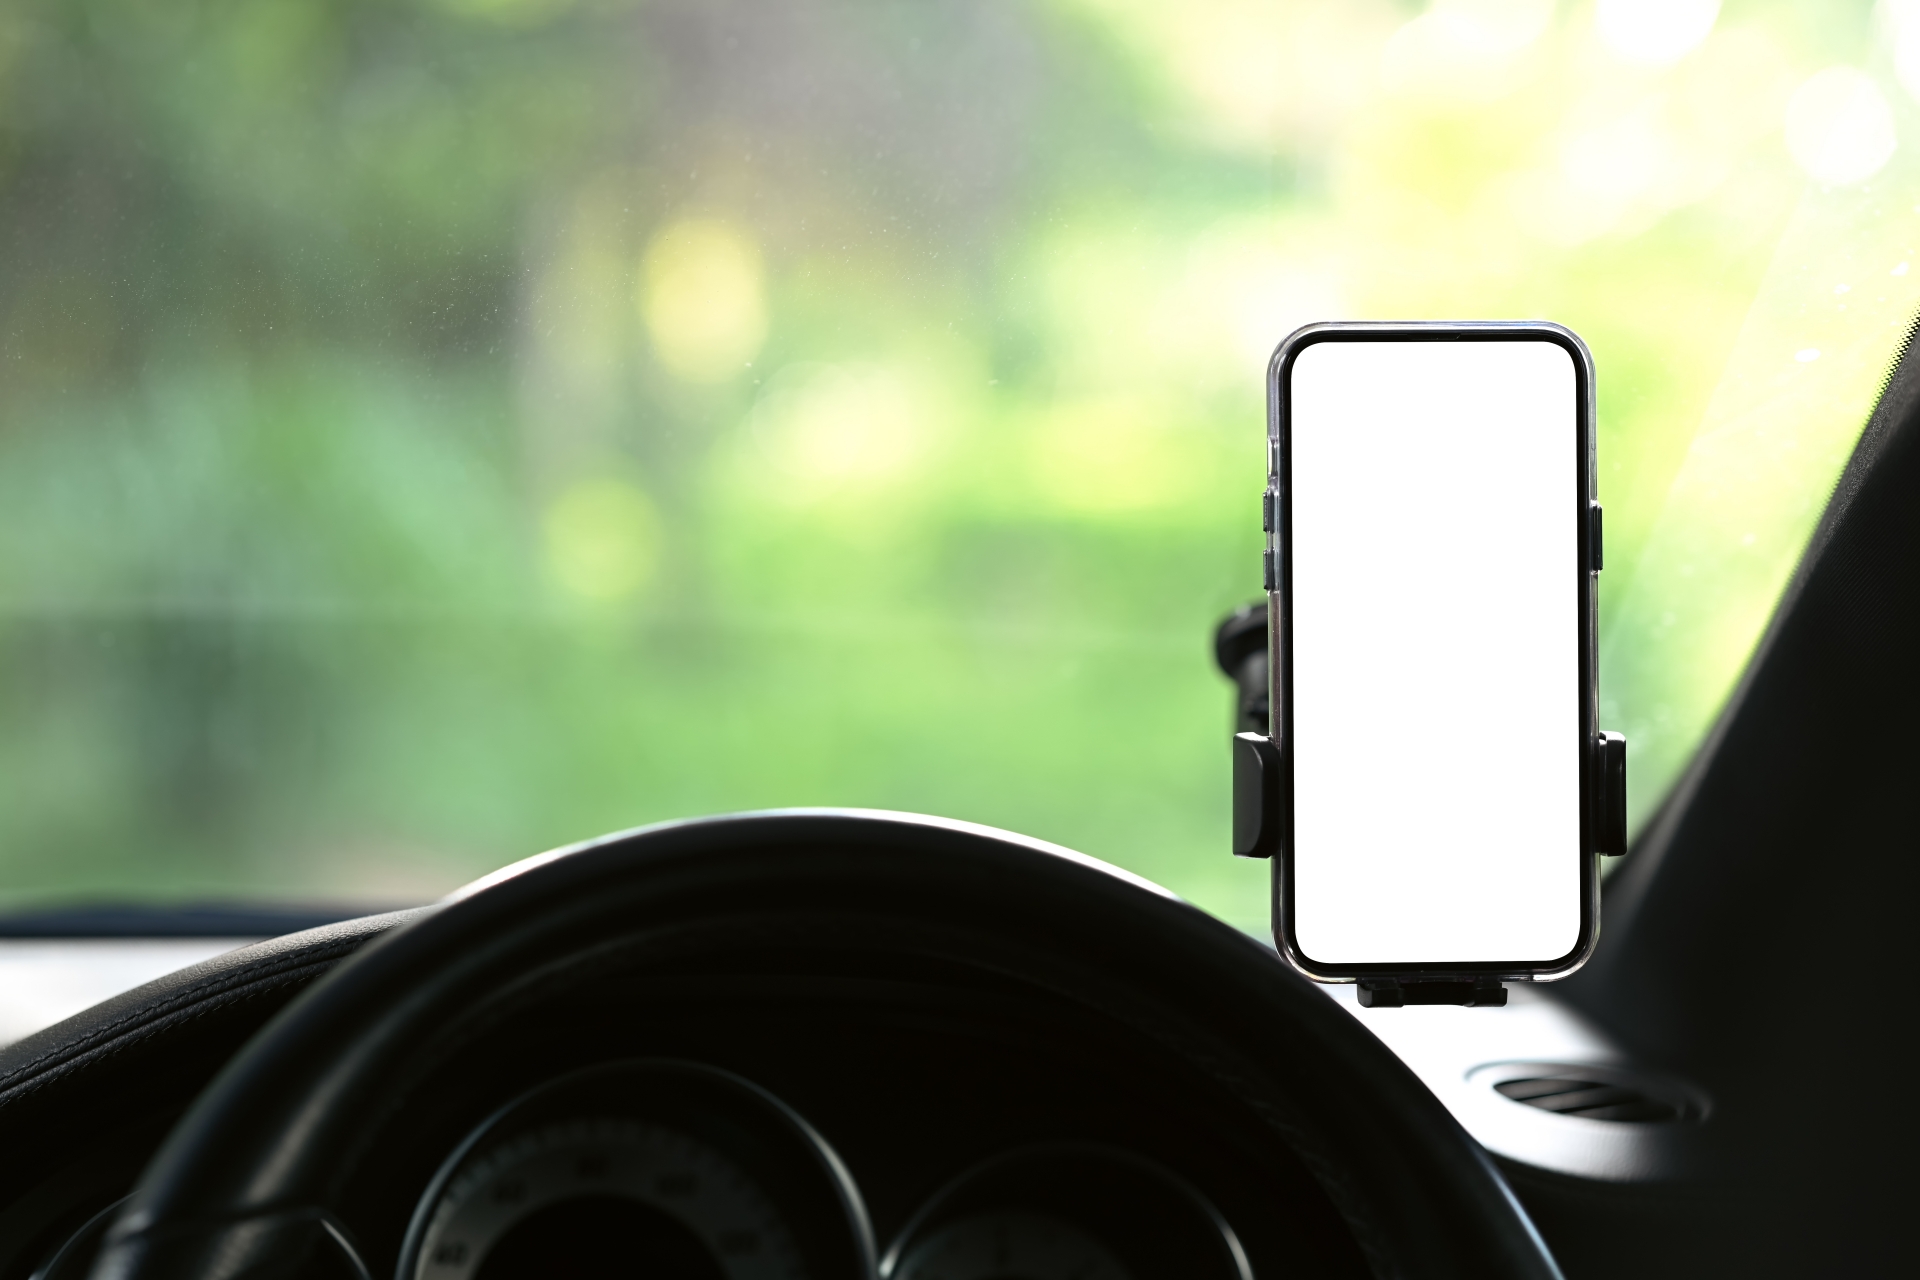 What You Need To Know About Mobile Phone Usage In Your Car